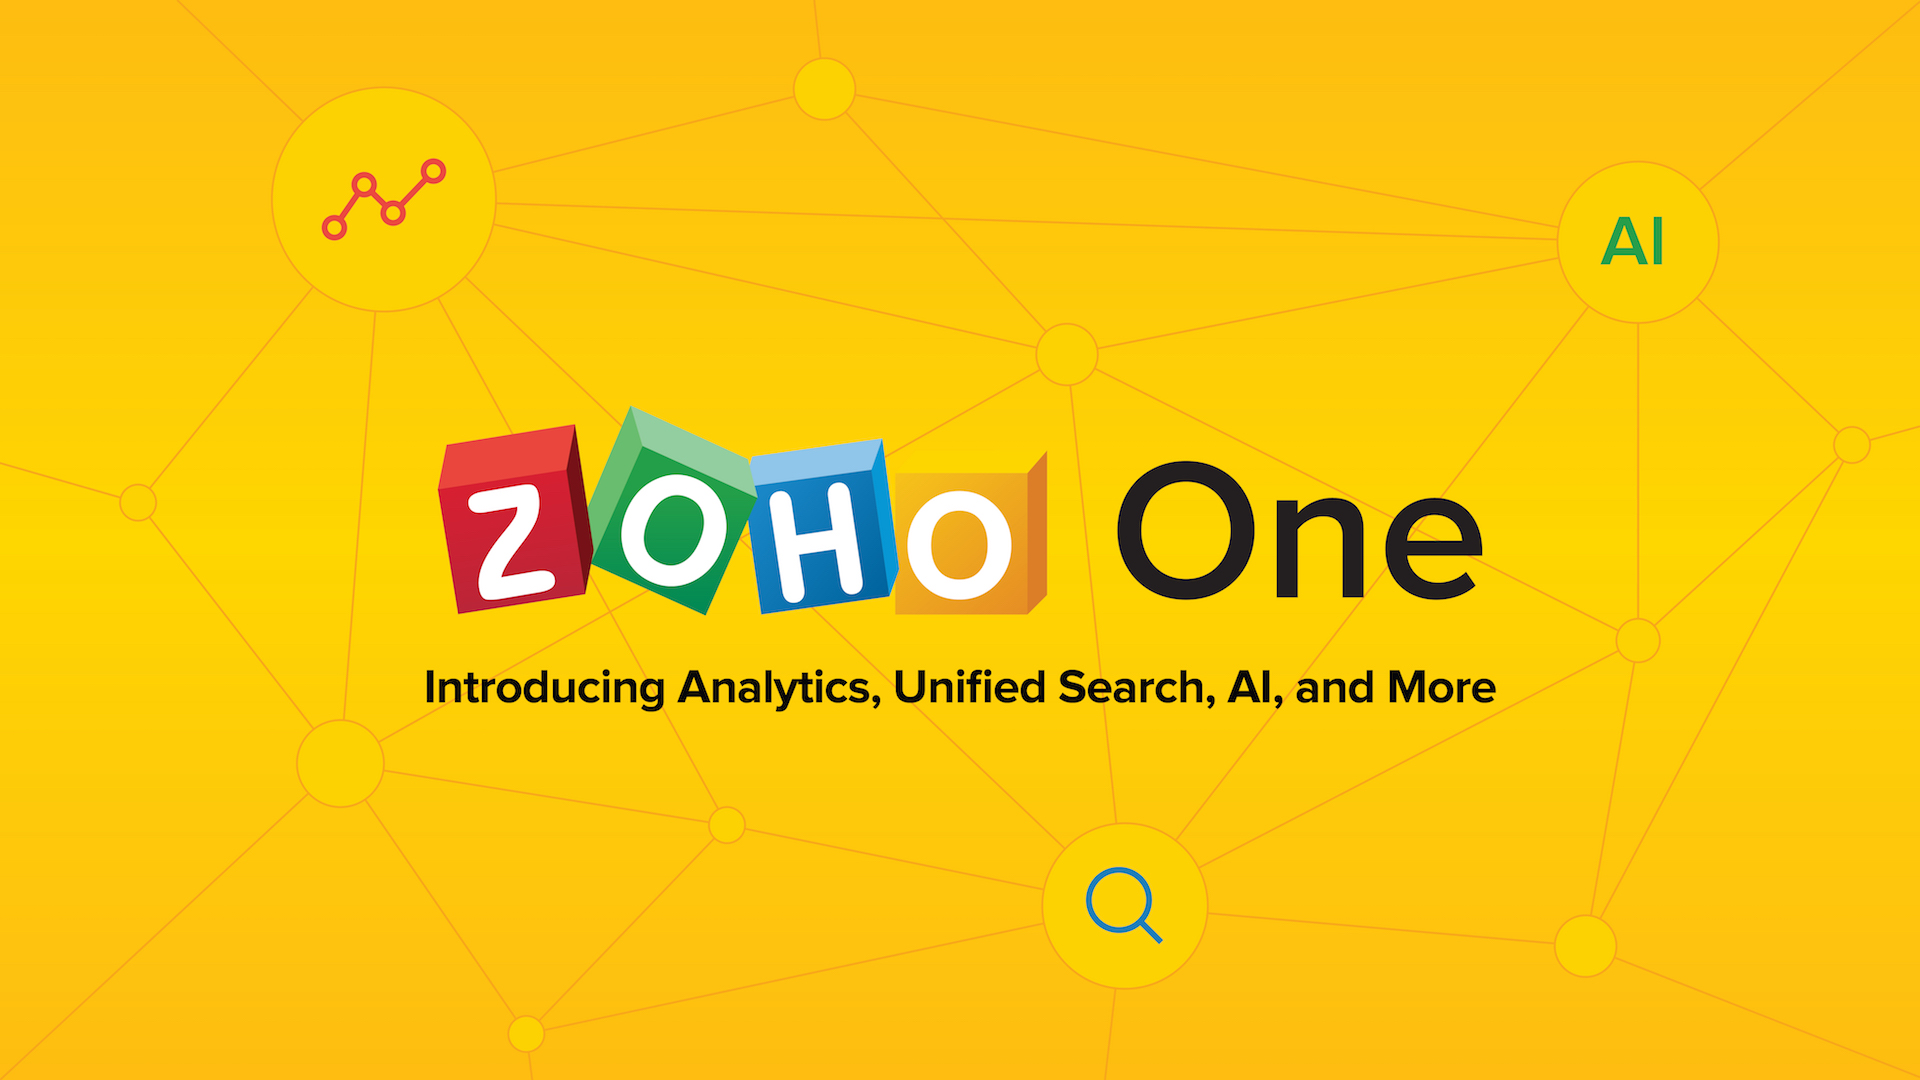 One Year of Zoho One: Introducing Analytics, Unified Search, AI, and More